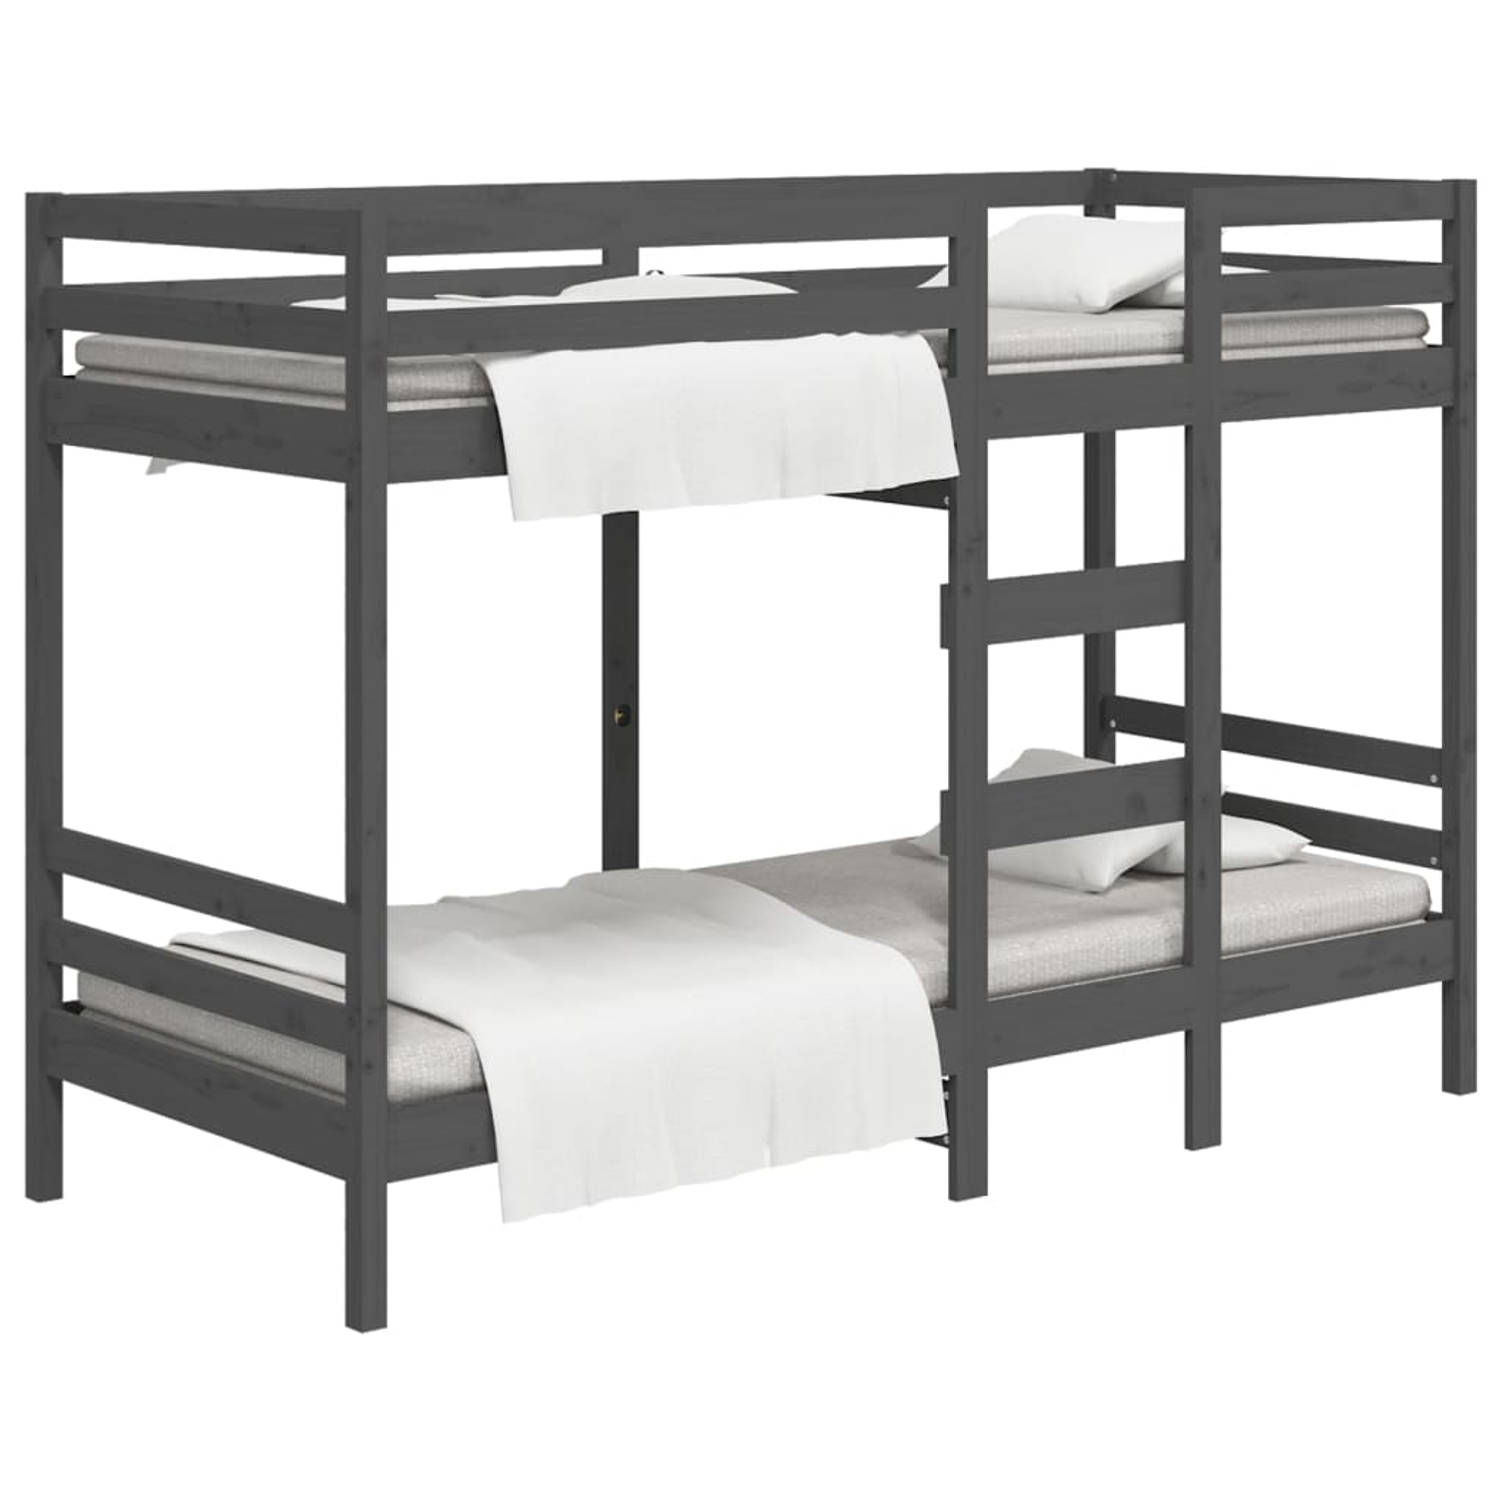 The Living Store Stapelbed massief grenenhout grijs 90x200 cm - Bed